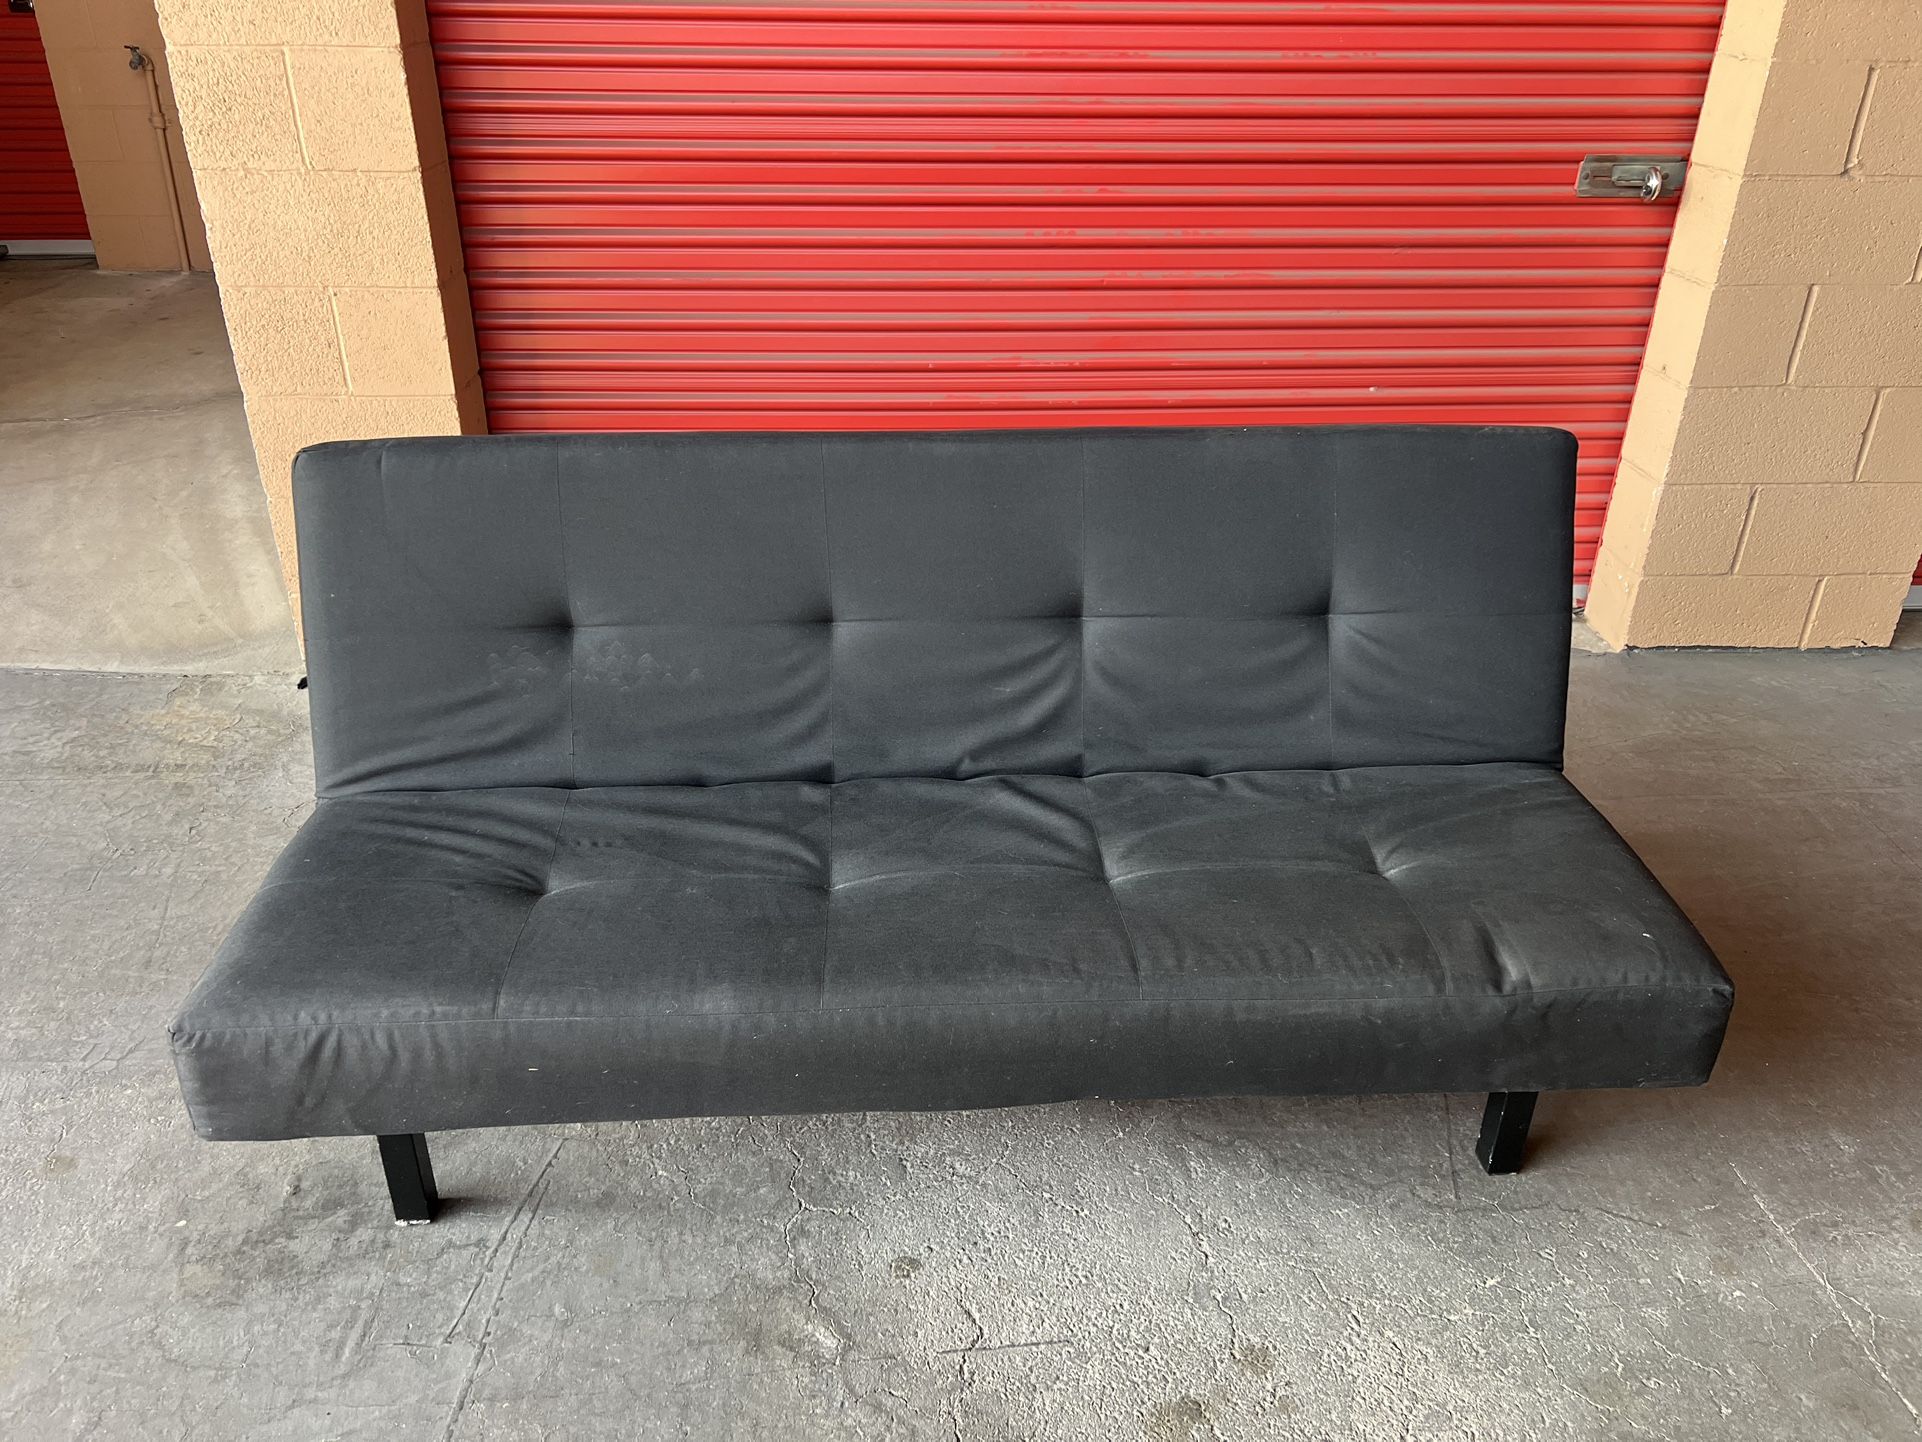 Ikea Balkarp Sleeper Sofa Sofa Bed Couch Black Color (Delivery Available)